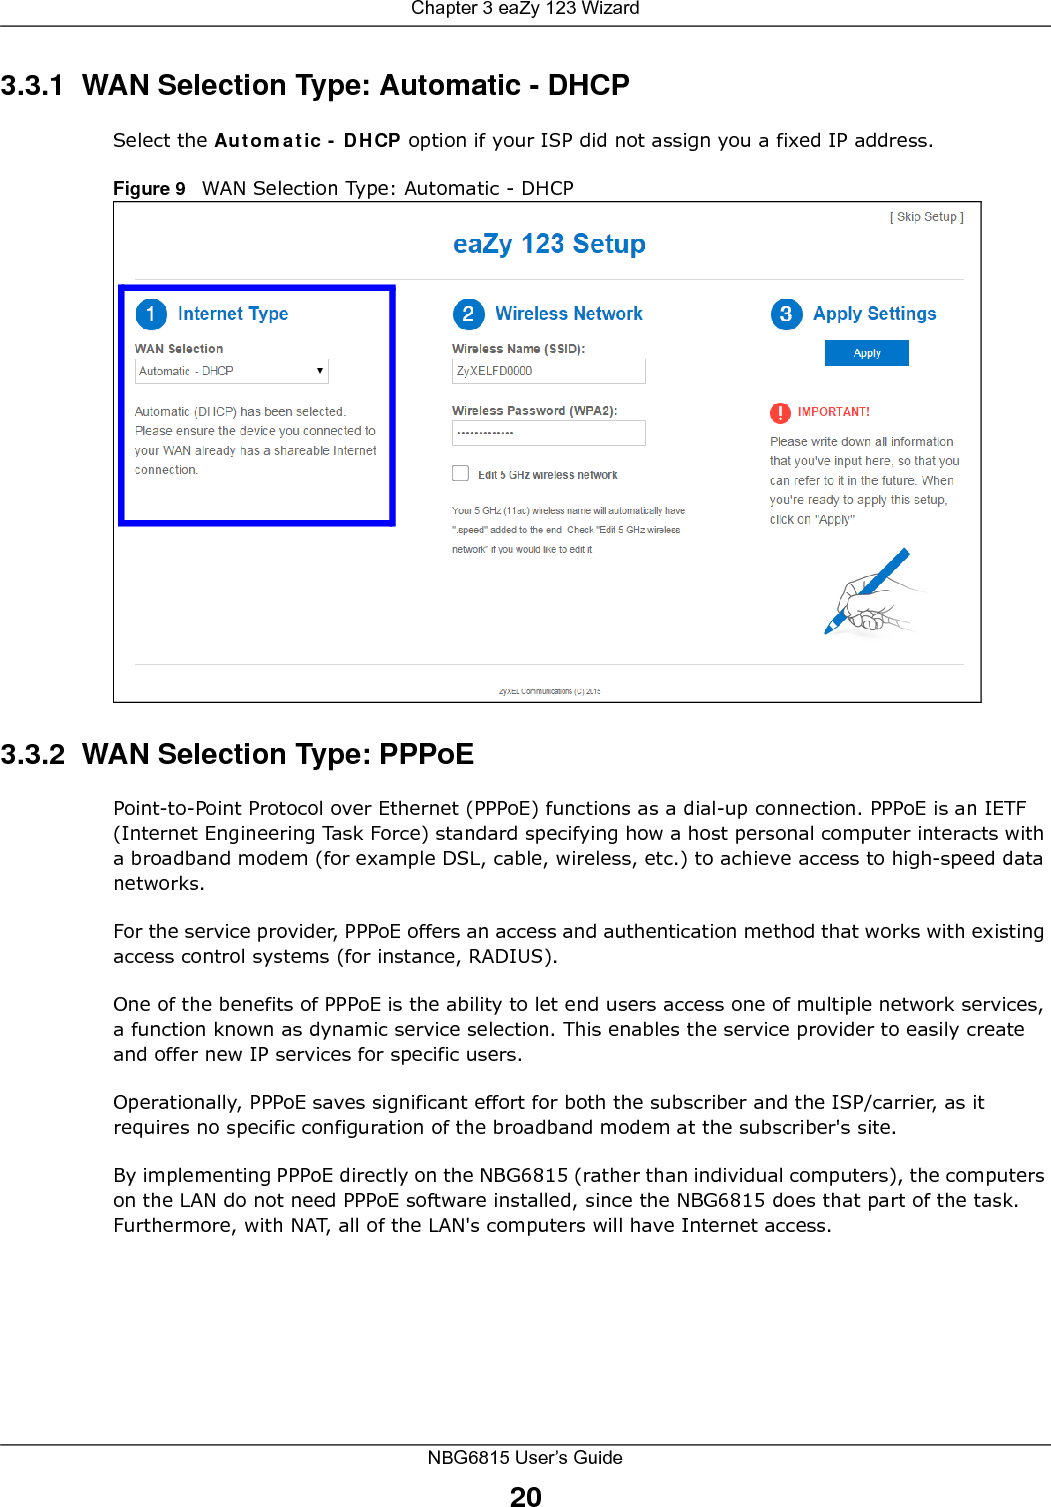 Chapter 3 eaZy 123 WizardNBG6815 User’s Guide203.3.1  WAN Selection Type: Automatic - DHCPSelect the Automatic - DHCP option if your ISP did not assign you a fixed IP address.Figure 9   WAN Selection Type: Automatic - DHCP3.3.2  WAN Selection Type: PPPoEPoint-to-Point Protocol over Ethernet (PPPoE) functions as a dial-up connection. PPPoE is an IETF (Internet Engineering Task Force) standard specifying how a host personal computer interacts with a broadband modem (for example DSL, cable, wireless, etc.) to achieve access to high-speed data networks.For the service provider, PPPoE offers an access and authentication method that works with existing access control systems (for instance, RADIUS). One of the benefits of PPPoE is the ability to let end users access one of multiple network services, a function known as dynamic service selection. This enables the service provider to easily create and offer new IP services for specific users.Operationally, PPPoE saves significant effort for both the subscriber and the ISP/carrier, as it requires no specific configuration of the broadband modem at the subscriber&apos;s site.By implementing PPPoE directly on the NBG6815 (rather than individual computers), the computers on the LAN do not need PPPoE software installed, since the NBG6815 does that part of the task. Furthermore, with NAT, all of the LAN&apos;s computers will have Internet access.